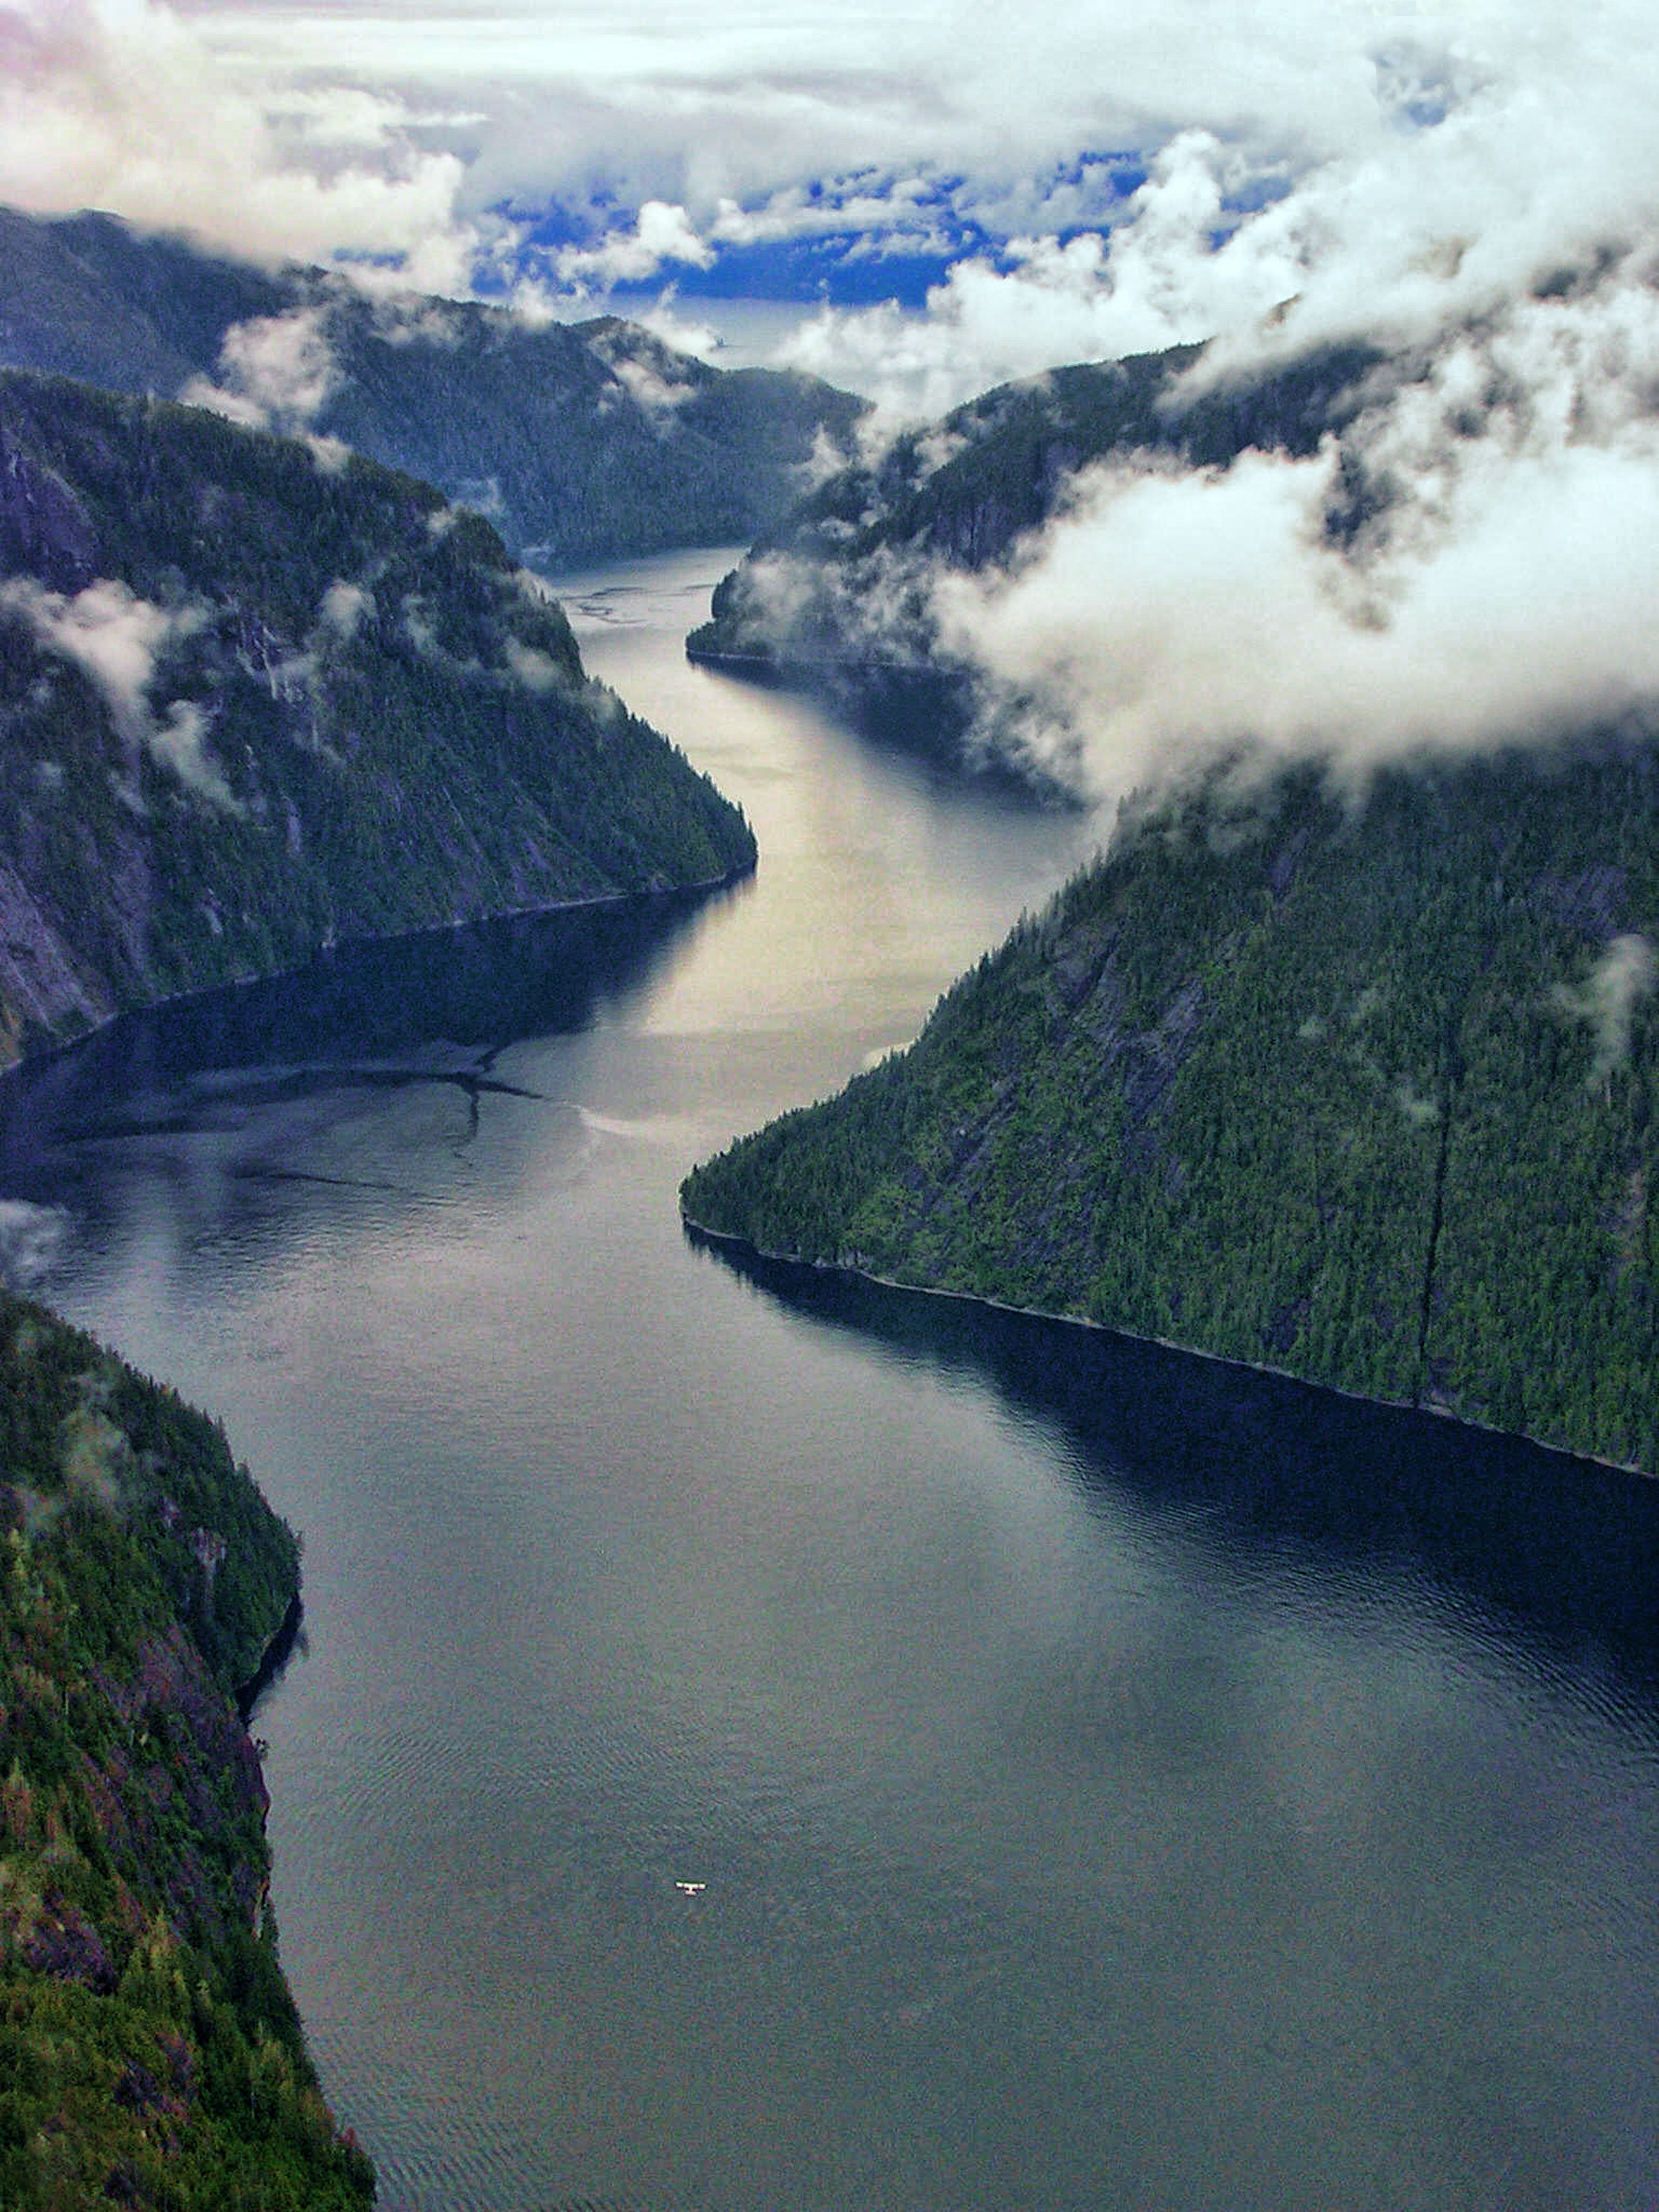 A view of Misty Fjords&#x27; mountain peaks with a body of water cutting through it and fog enveloping the view